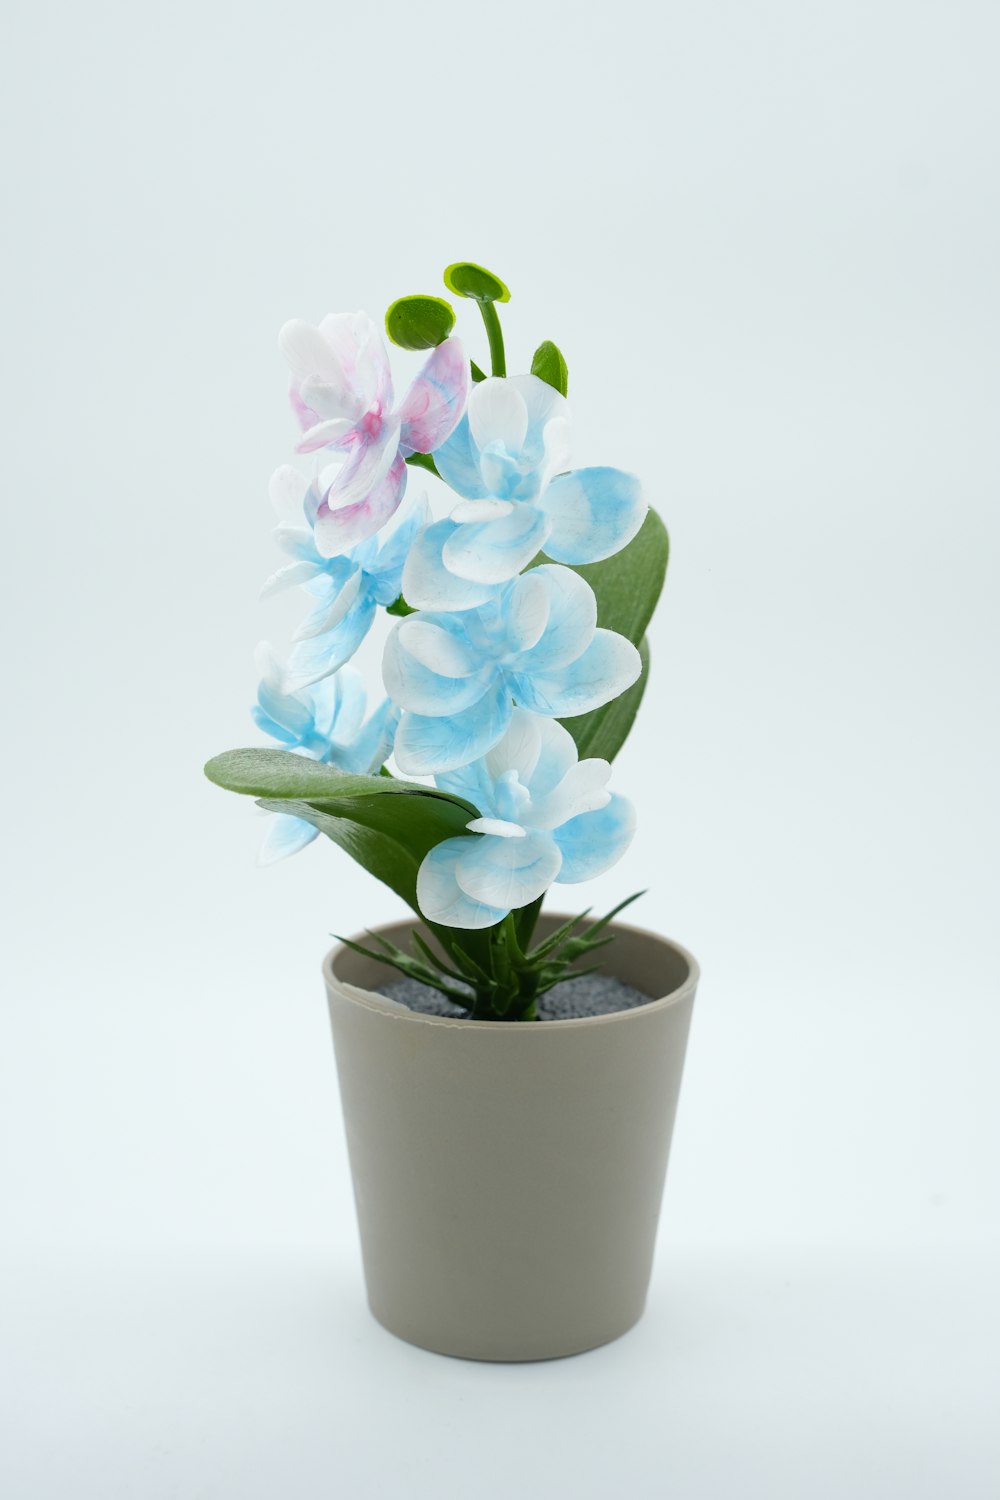 a potted plant with blue and white flowers